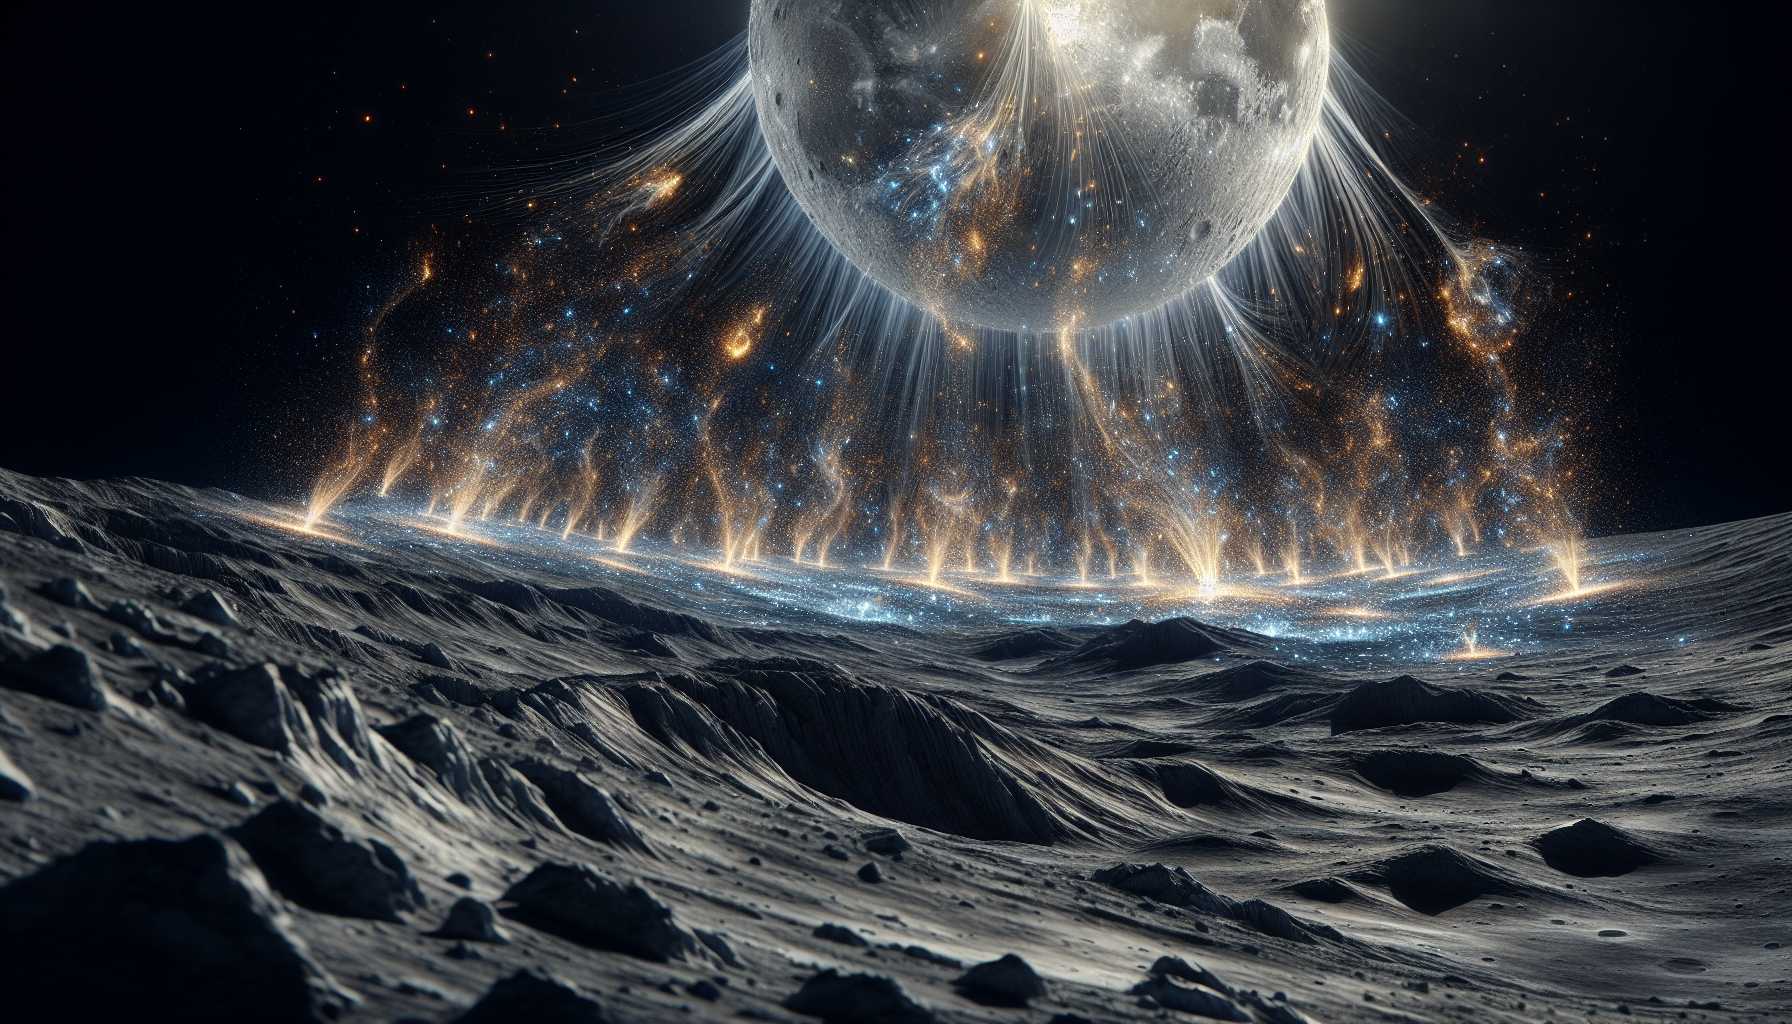 the moon's surface bombarded with solar wind particles